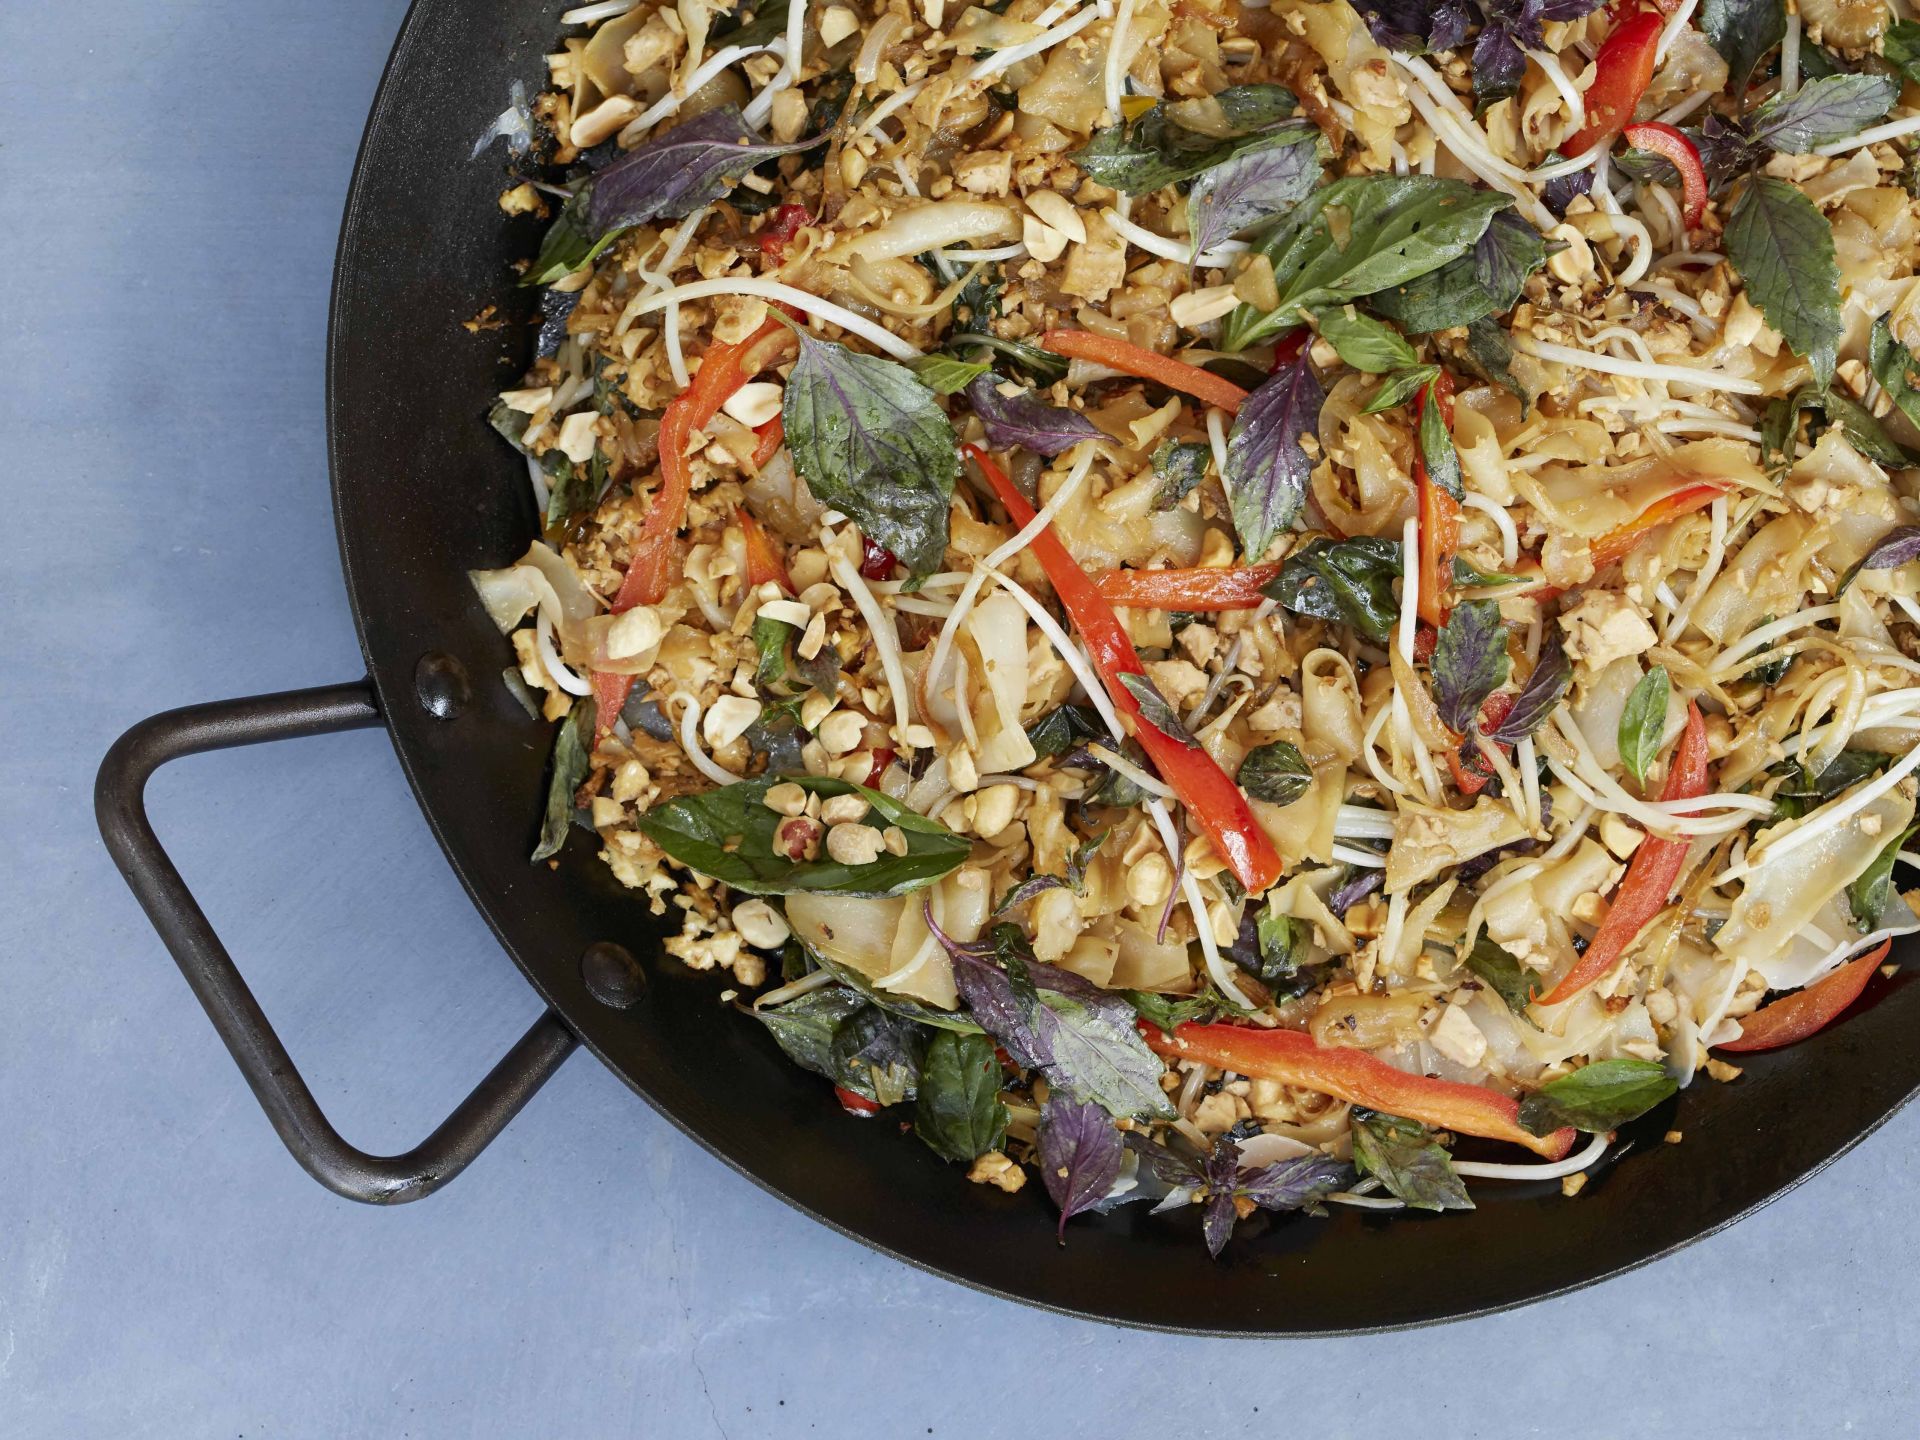 Pad kee mao, one of the plant-based offerings from The Purple Carrot.